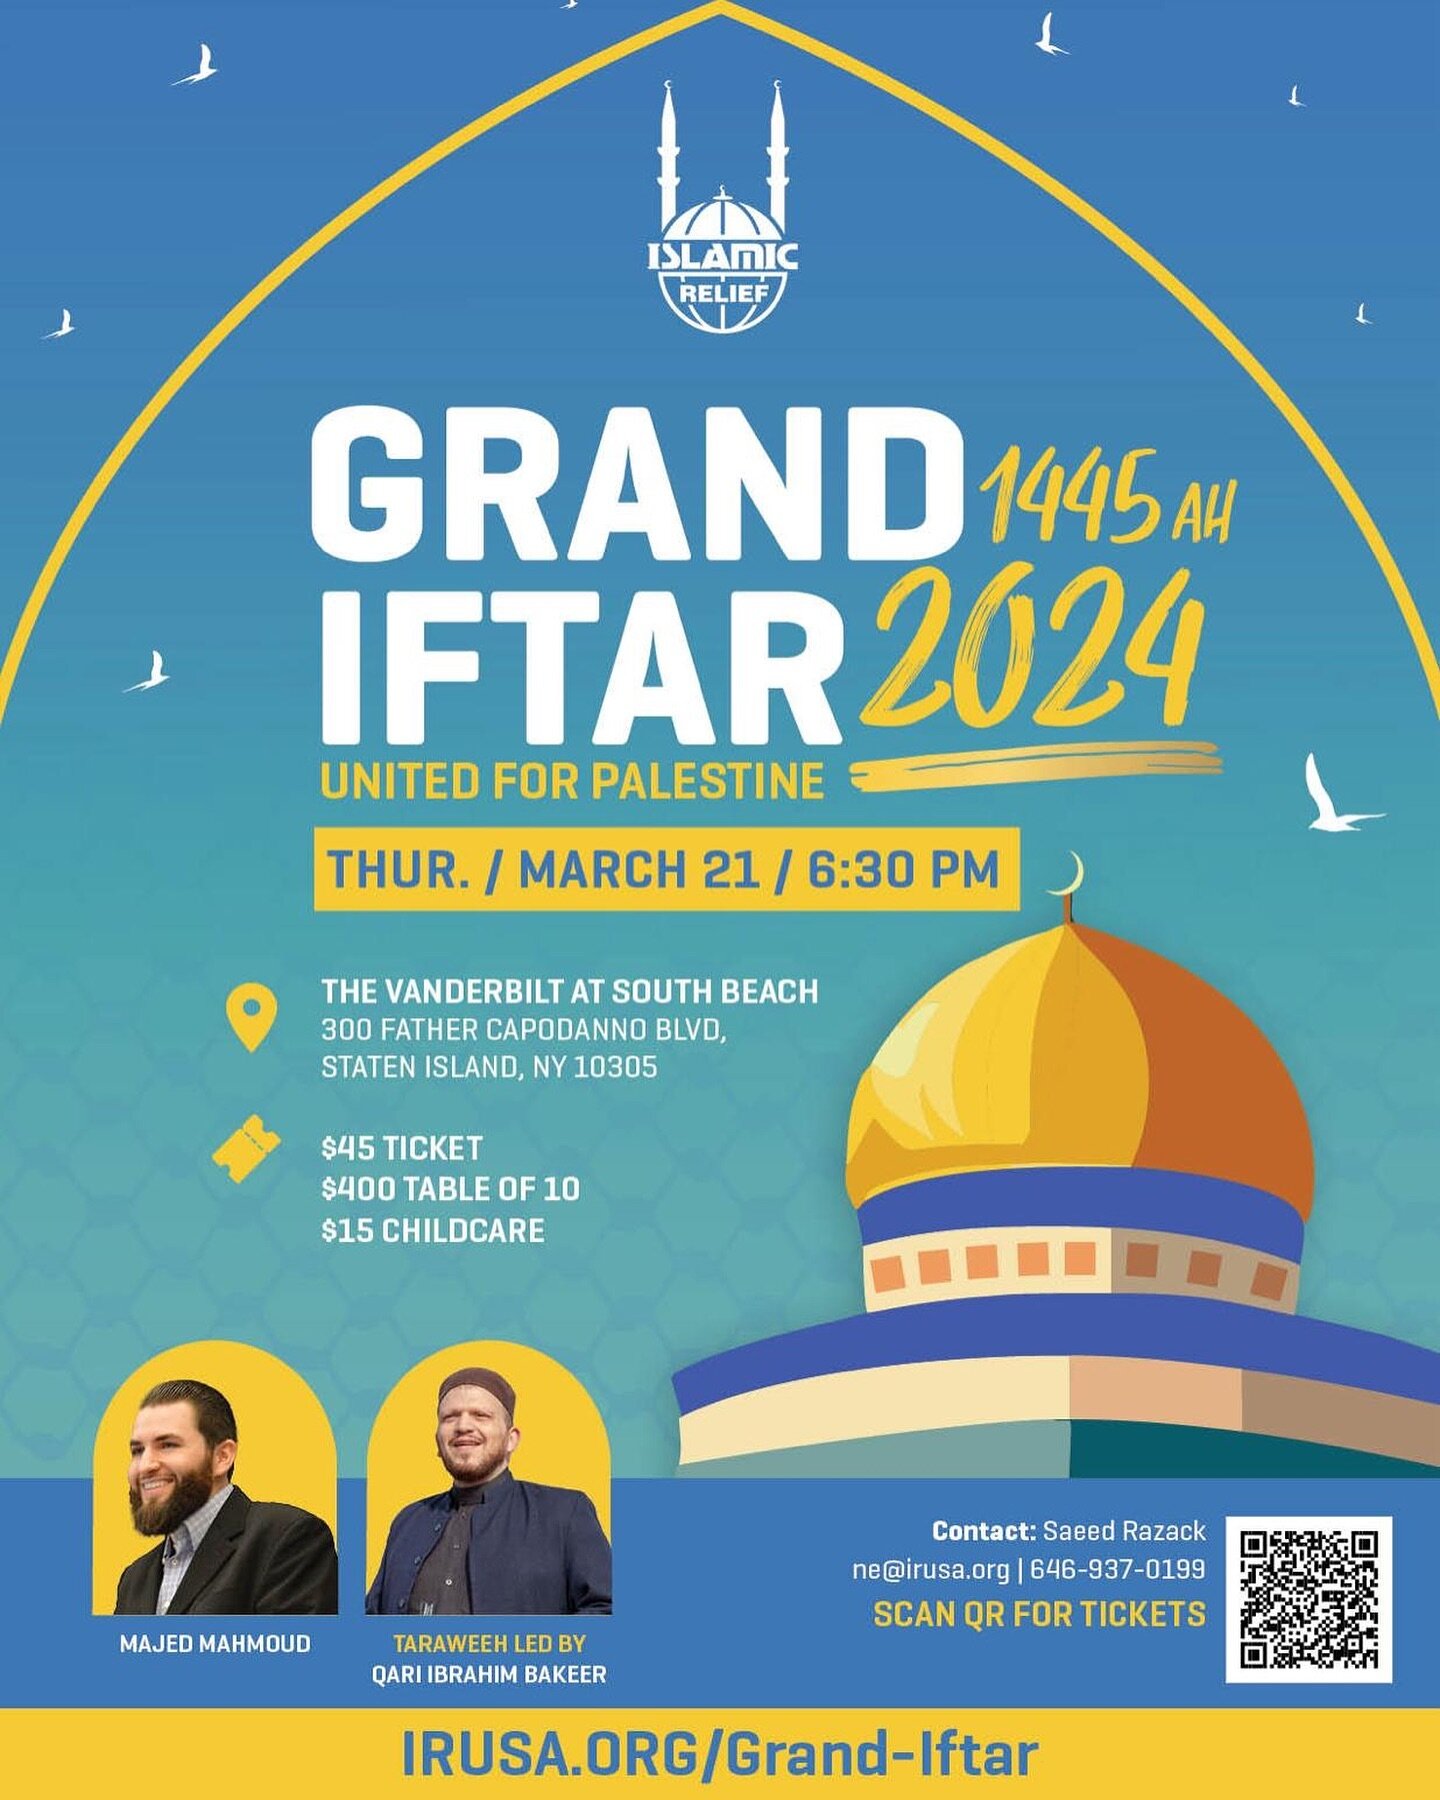 Join us for iftar and Taraweeh on Thursday March 21! Scan QR code for tickets or visit this link: irusa.org/Grand-Iftar. We hope to see you there Insha&rsquo;Allah😊